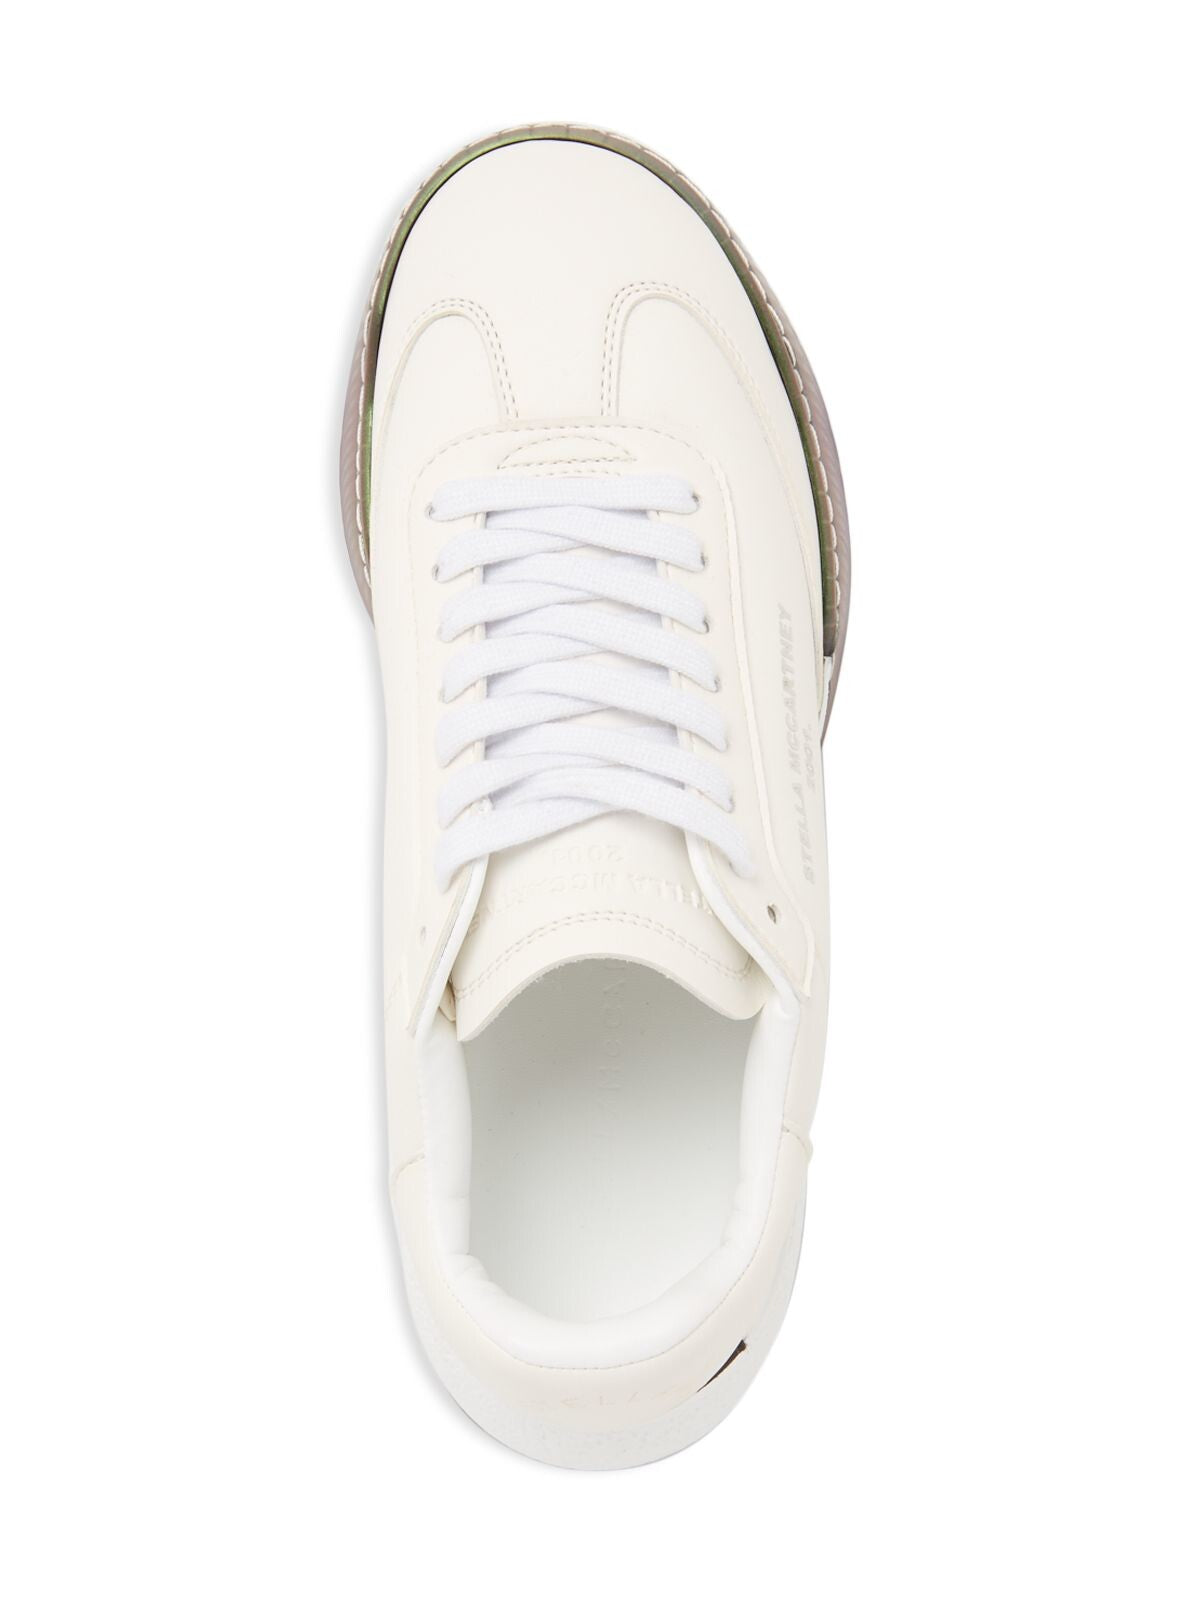 STELLAMCCARTNEY Womens White Iridescent Removable Insole Logo Loop Sm84 Round Toe Wedge Lace-Up Athletic Sneakers Shoes 38